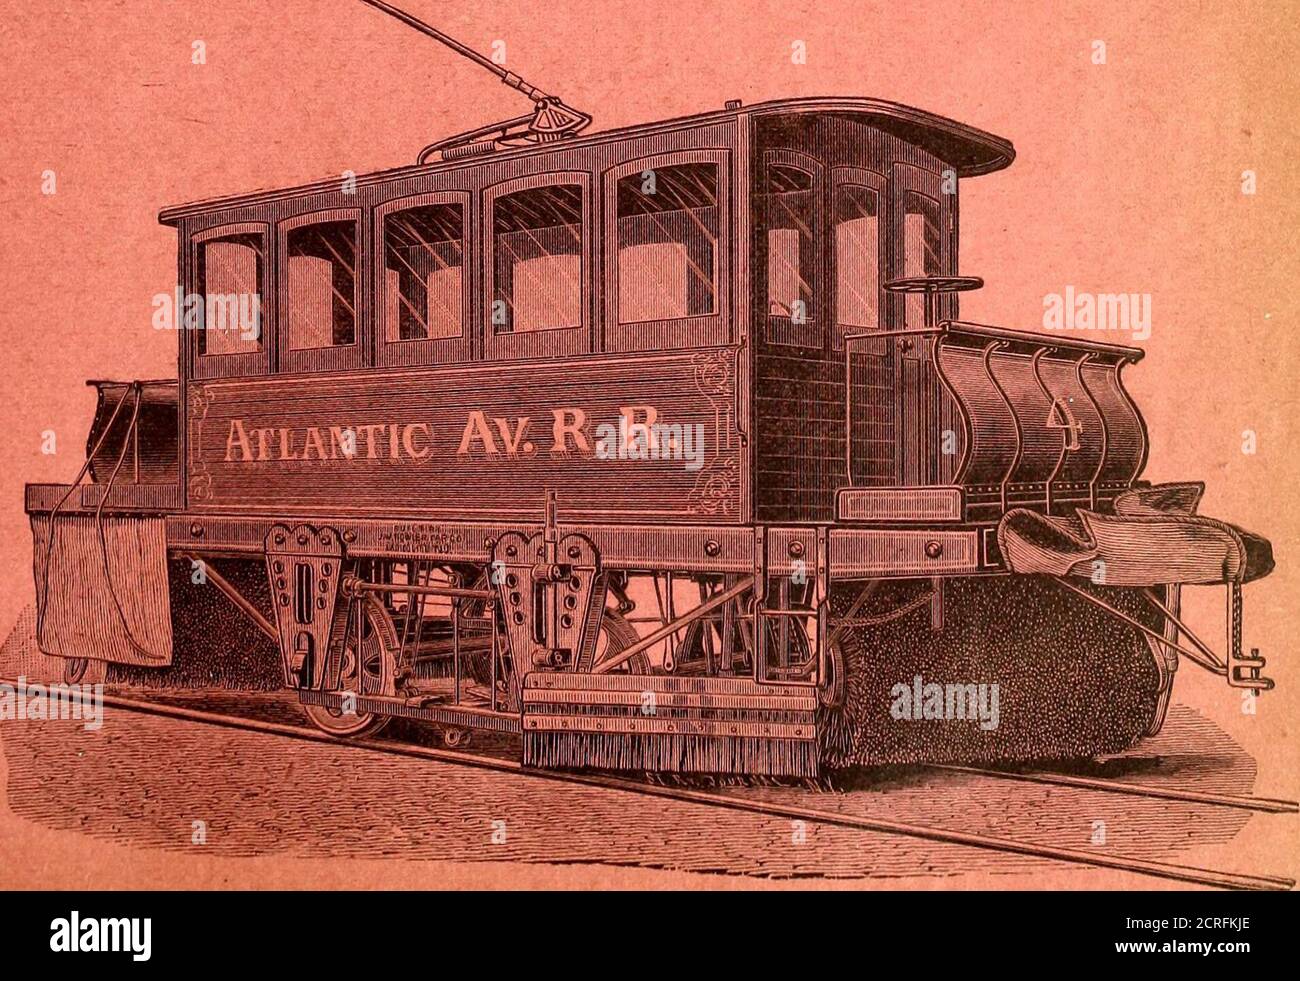 . The Street railway journal . Snow Sweeper withMl length cab, themotorman operatingsame on the inside.Same as bnilt by usfor Scranton Trac-tion Go. ELECTRIC SNOW SWEEPERS BTJILT !BX THE J. W. FOWLER CAR CO, WORKS AND GENERAL OFFICE,ELIZABETH PORT, N. J. Electric Snow Sweep-er to be operated withthe motorman on theplatform, motor oper-ating the brooms in-side cab. Same asbuilt by us for theAtlantic Aye. R. R.Co, Brooklyn, N. Y.. THE STREET RAILWAY JOURNAL. [Vol. X. No. 2 J. W. FOWLER CAR CO. Stock Photo